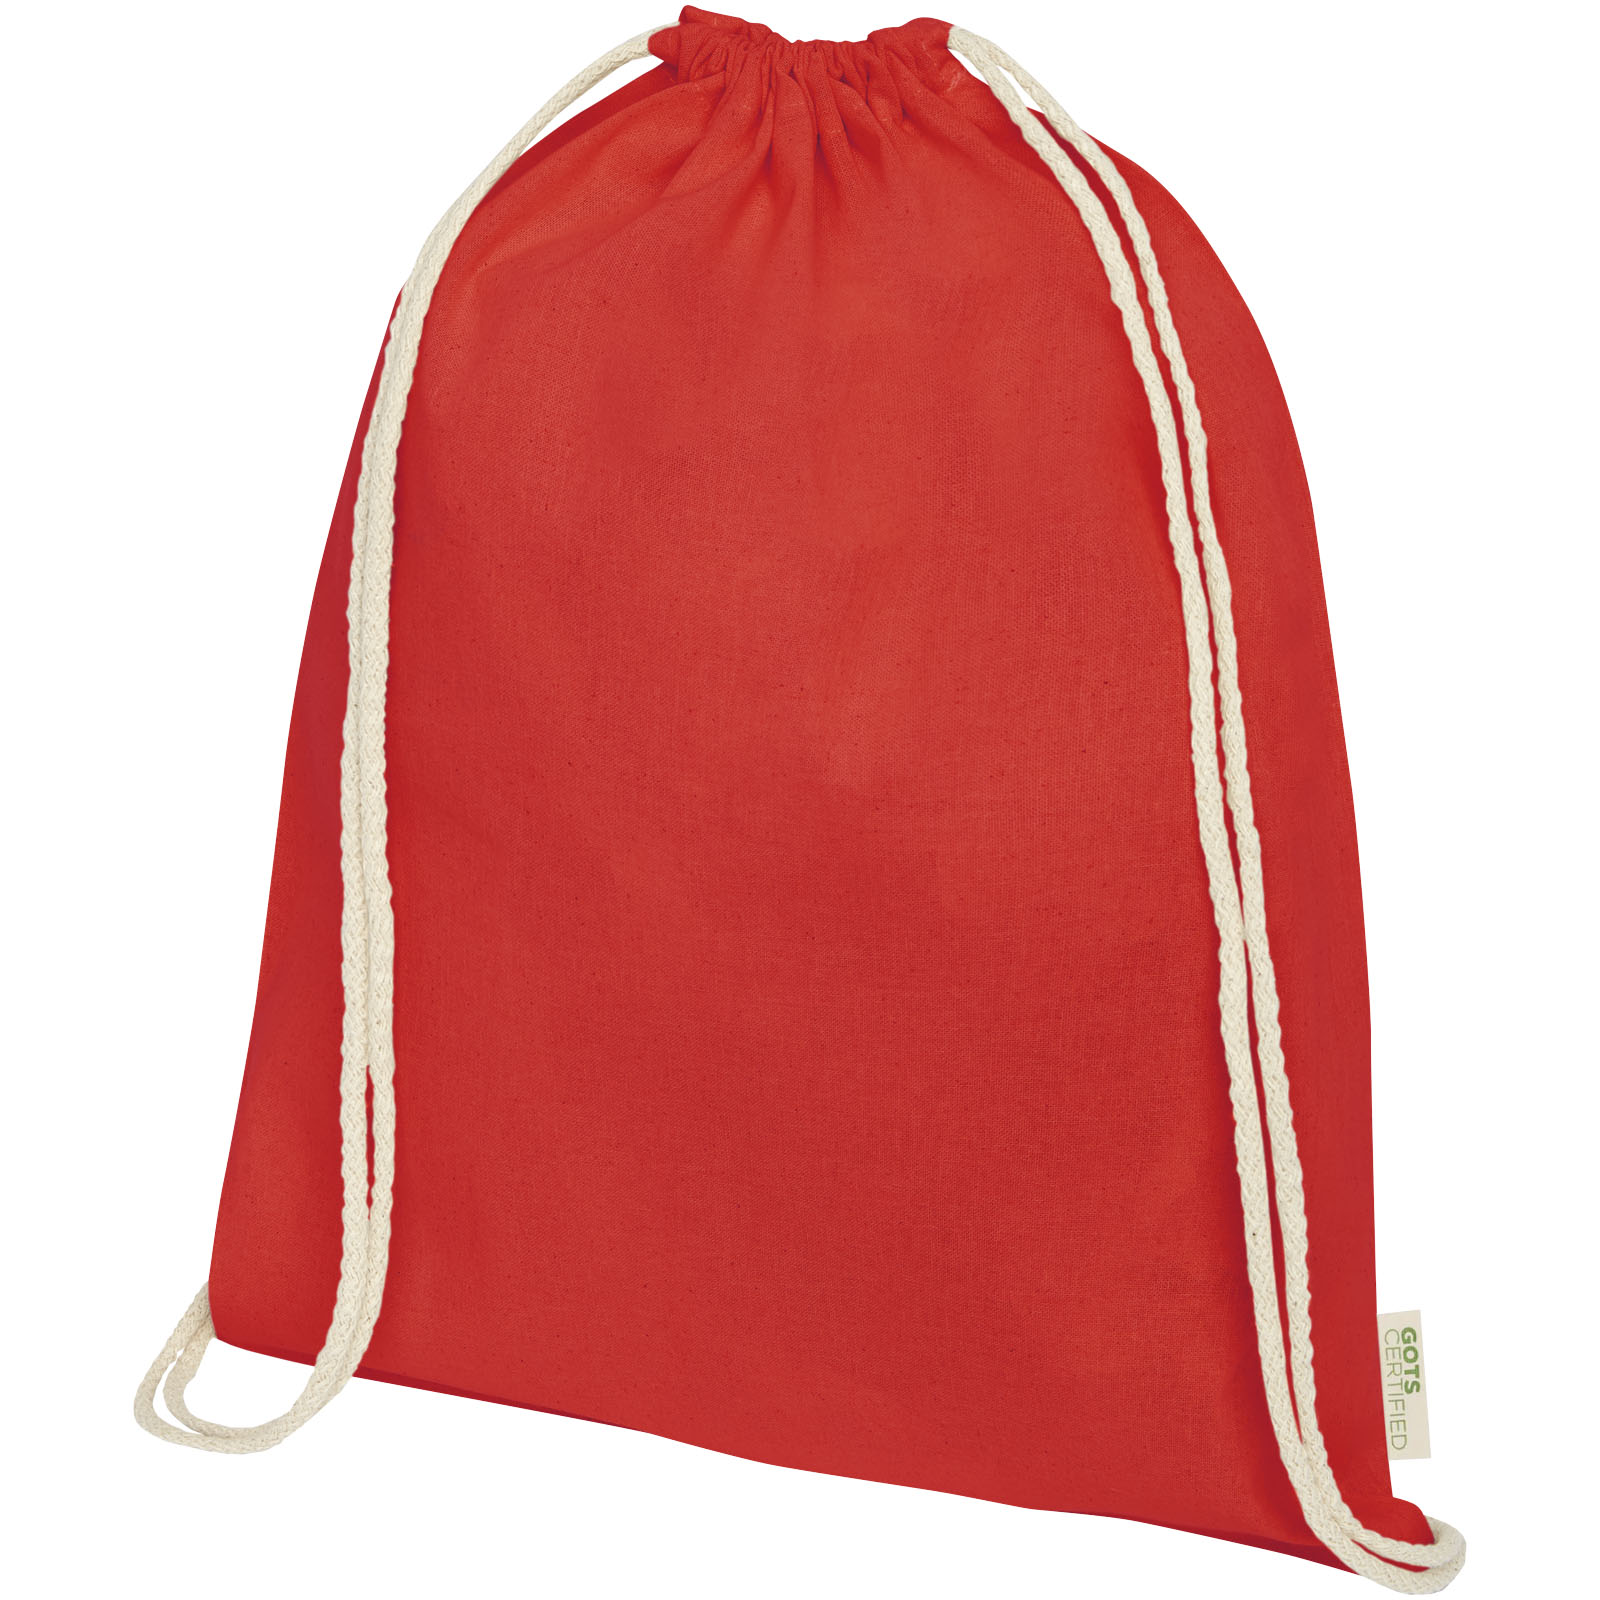 Organic cotton fabric backpack with drawstring FYFFE